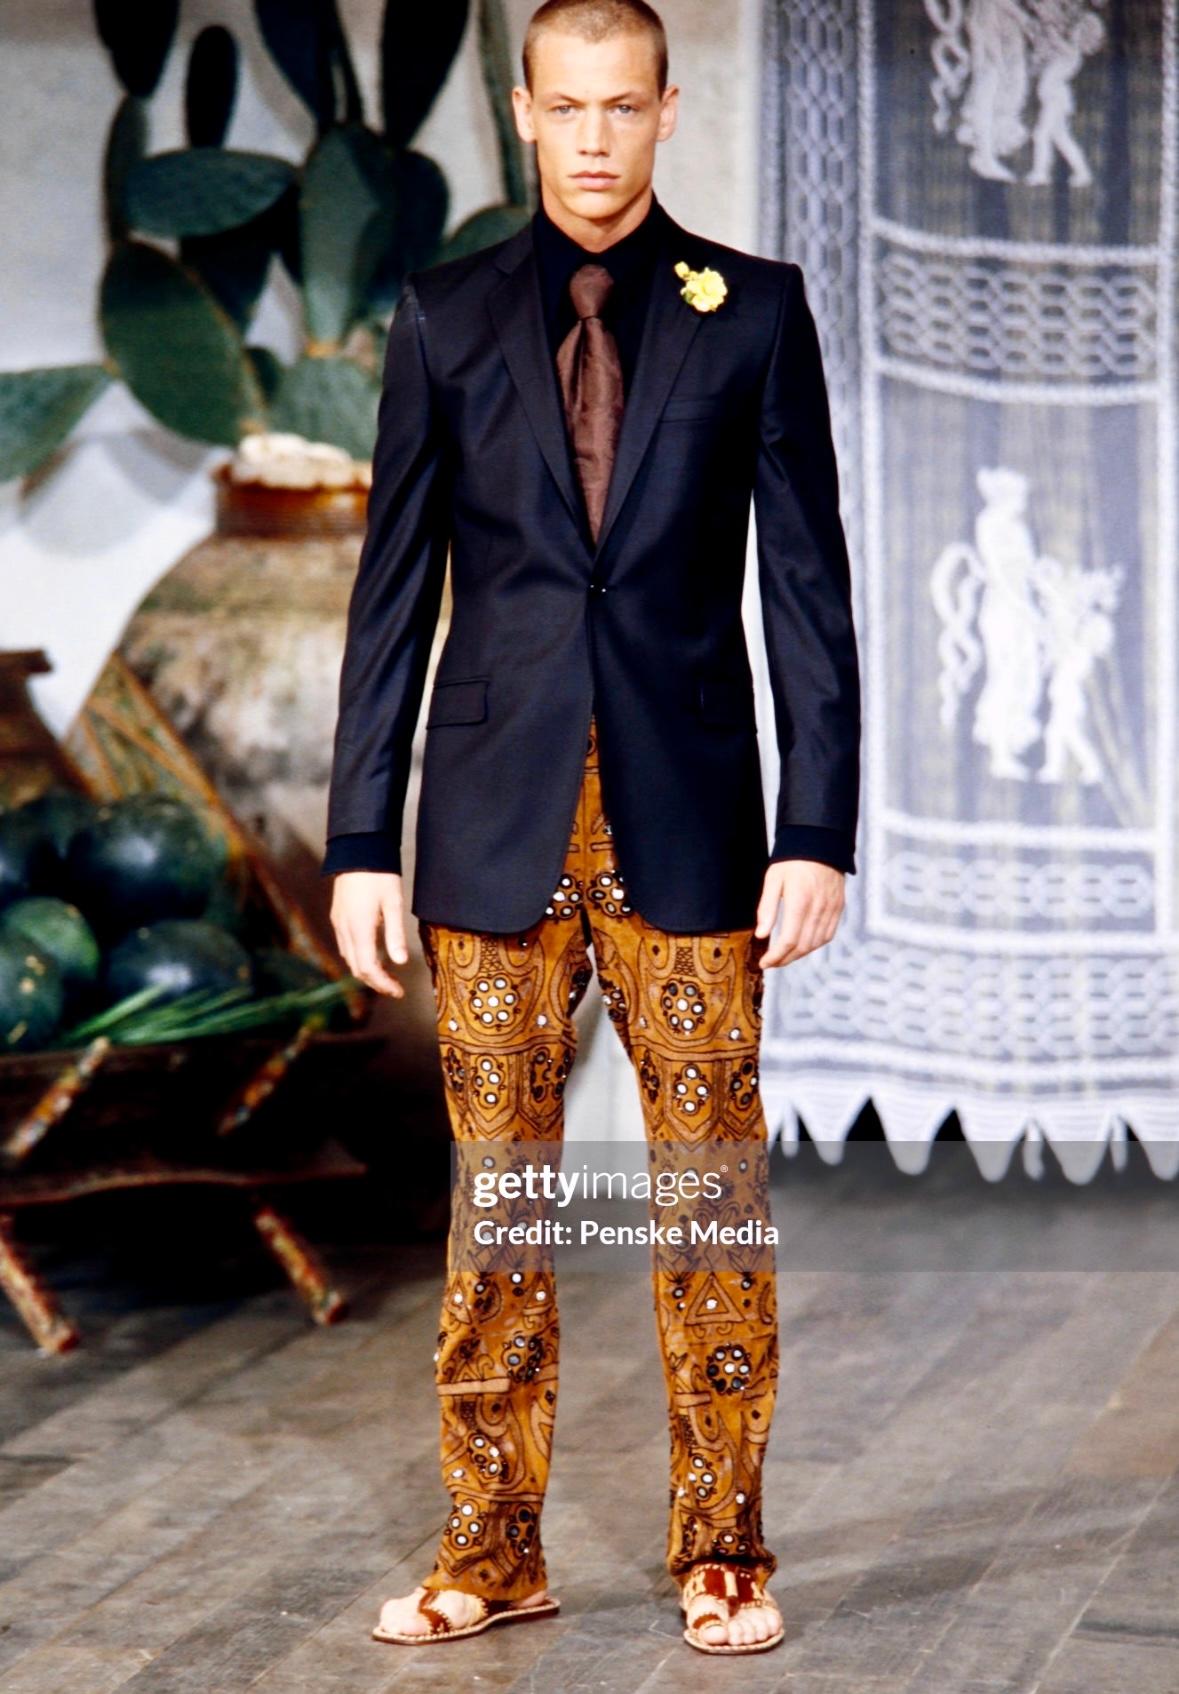 Presenting a pair of tan embellished Dolce & Gabbana suede pants. From the Spring/Summer 2001 collection, nearly identical pants debuted on the season's men's runway. Constructed entirely of tan suede, these pants feature a high waist and flare cut.